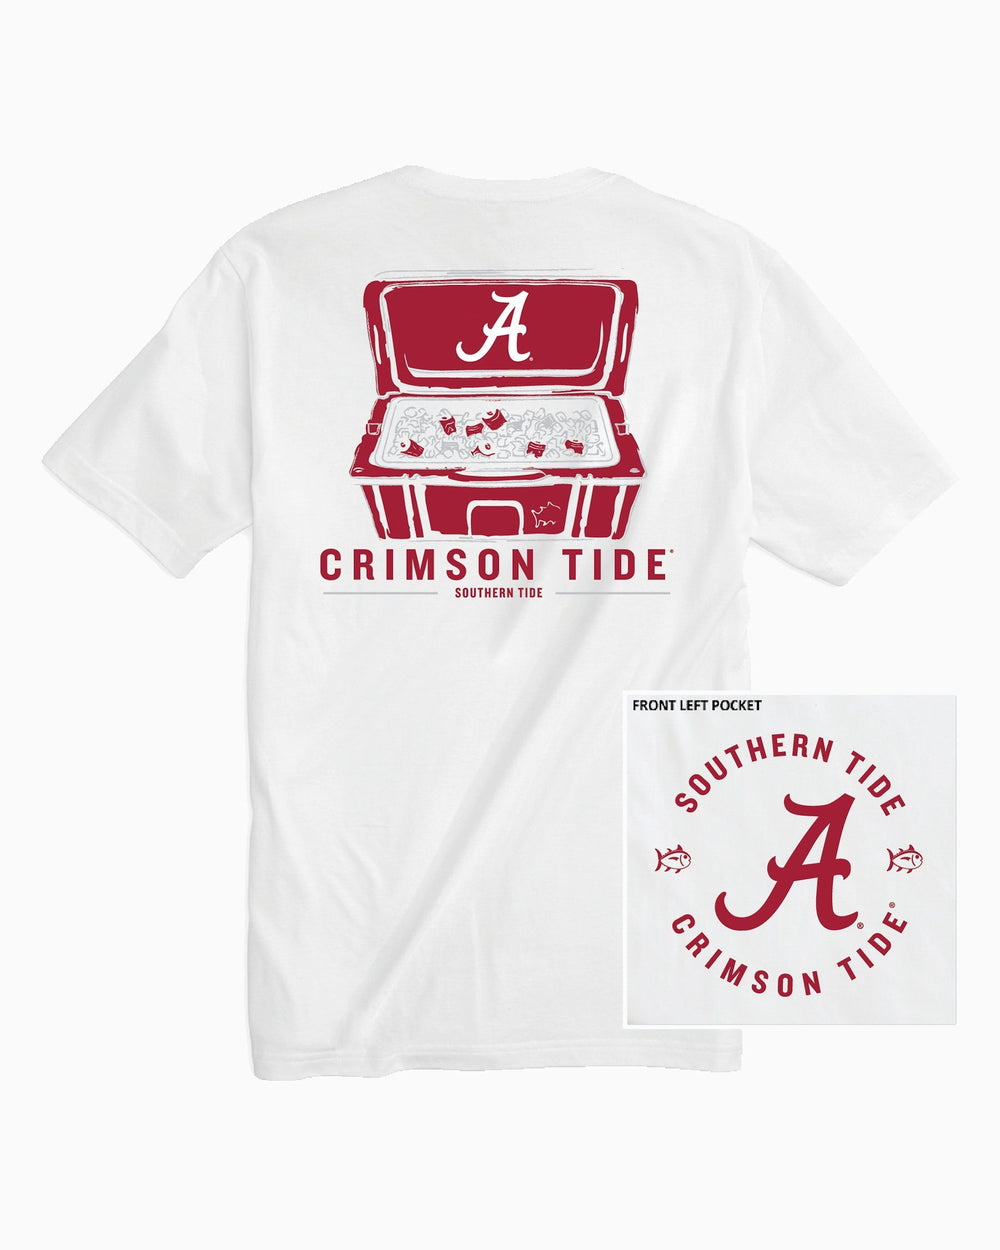 The back of the Men's Alabama Crimson Tide Cooler Short Sleeve T-Shirt by Southern Tide - Classic White